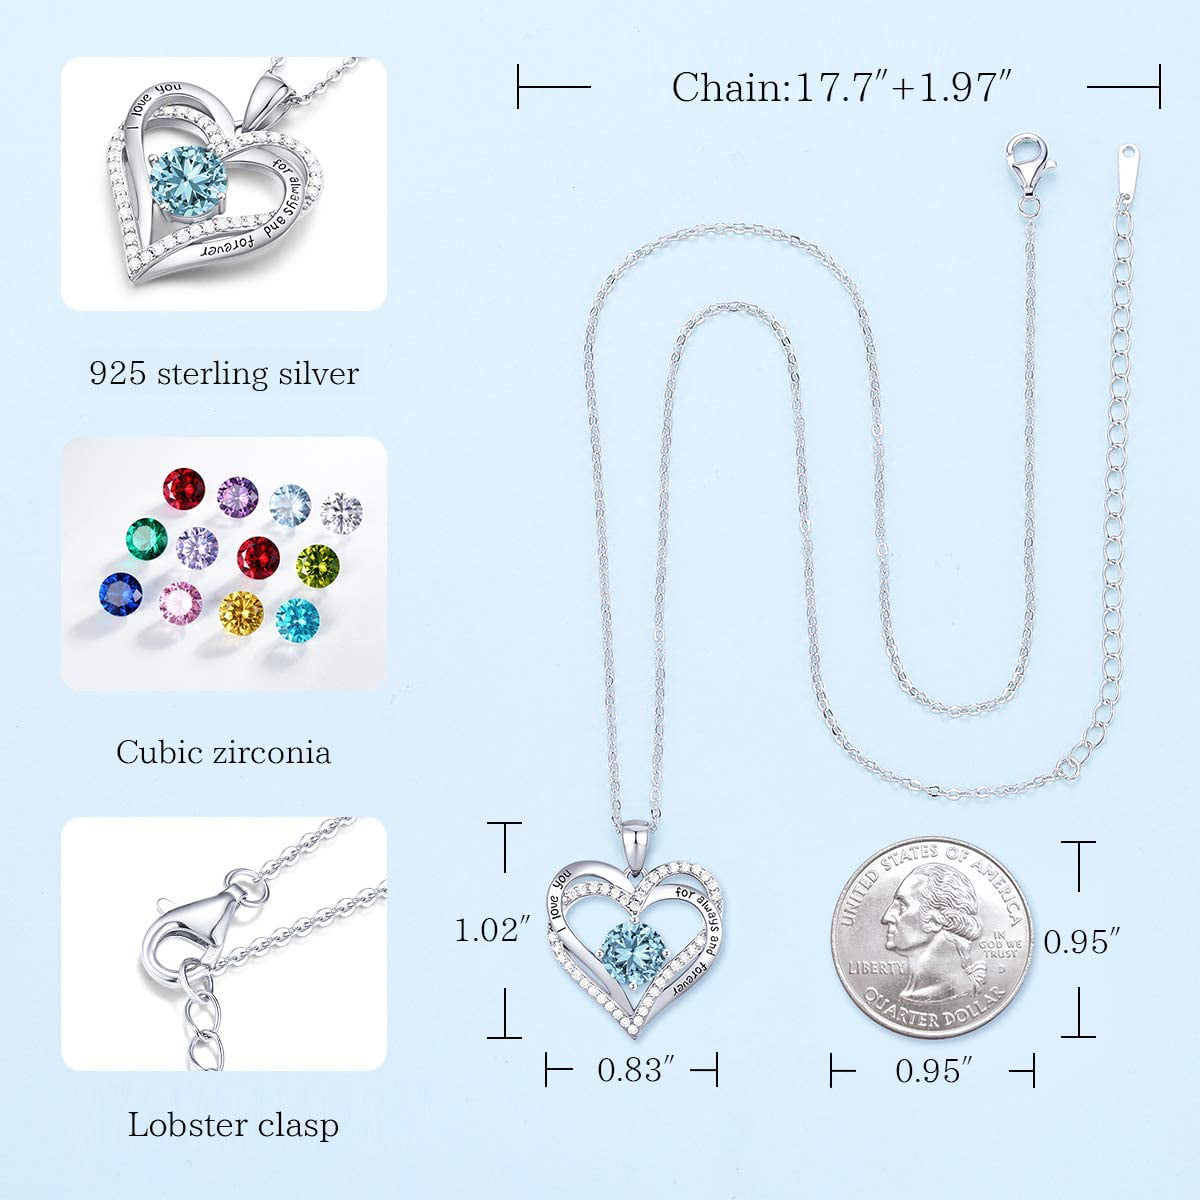 Details about   Multi Gemstone 925 Sterling Silver Chain Pendant For Women Anniversary Gift 152